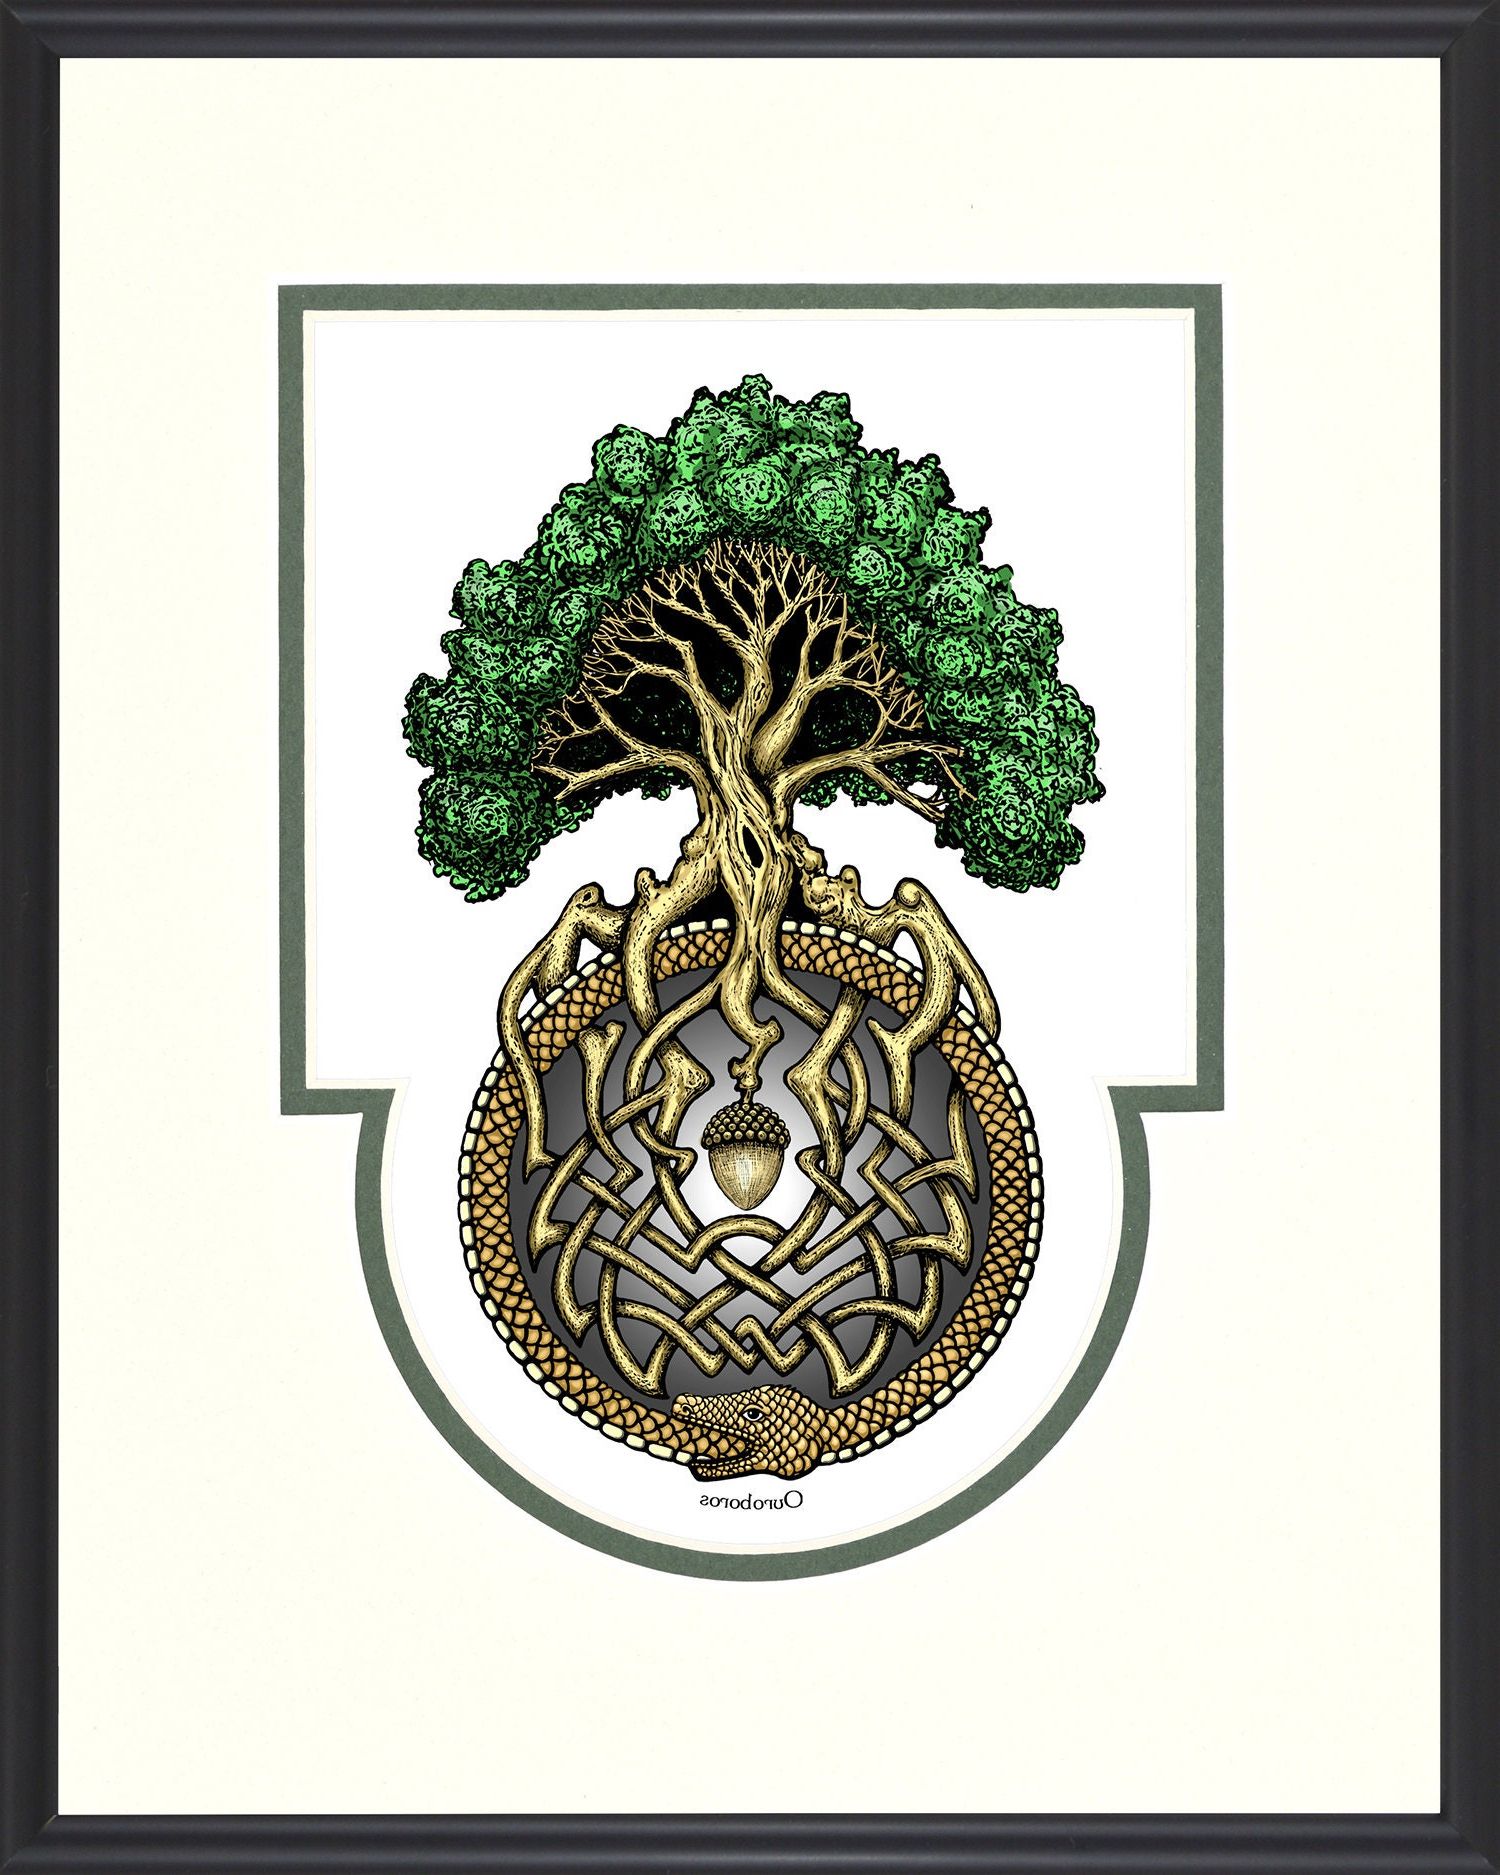 Ouroboros Tree  Framed Digital Art Print – 8 X 10 Within Most Recently Released Dragon Tree Framed Art Prints (View 3 of 20)